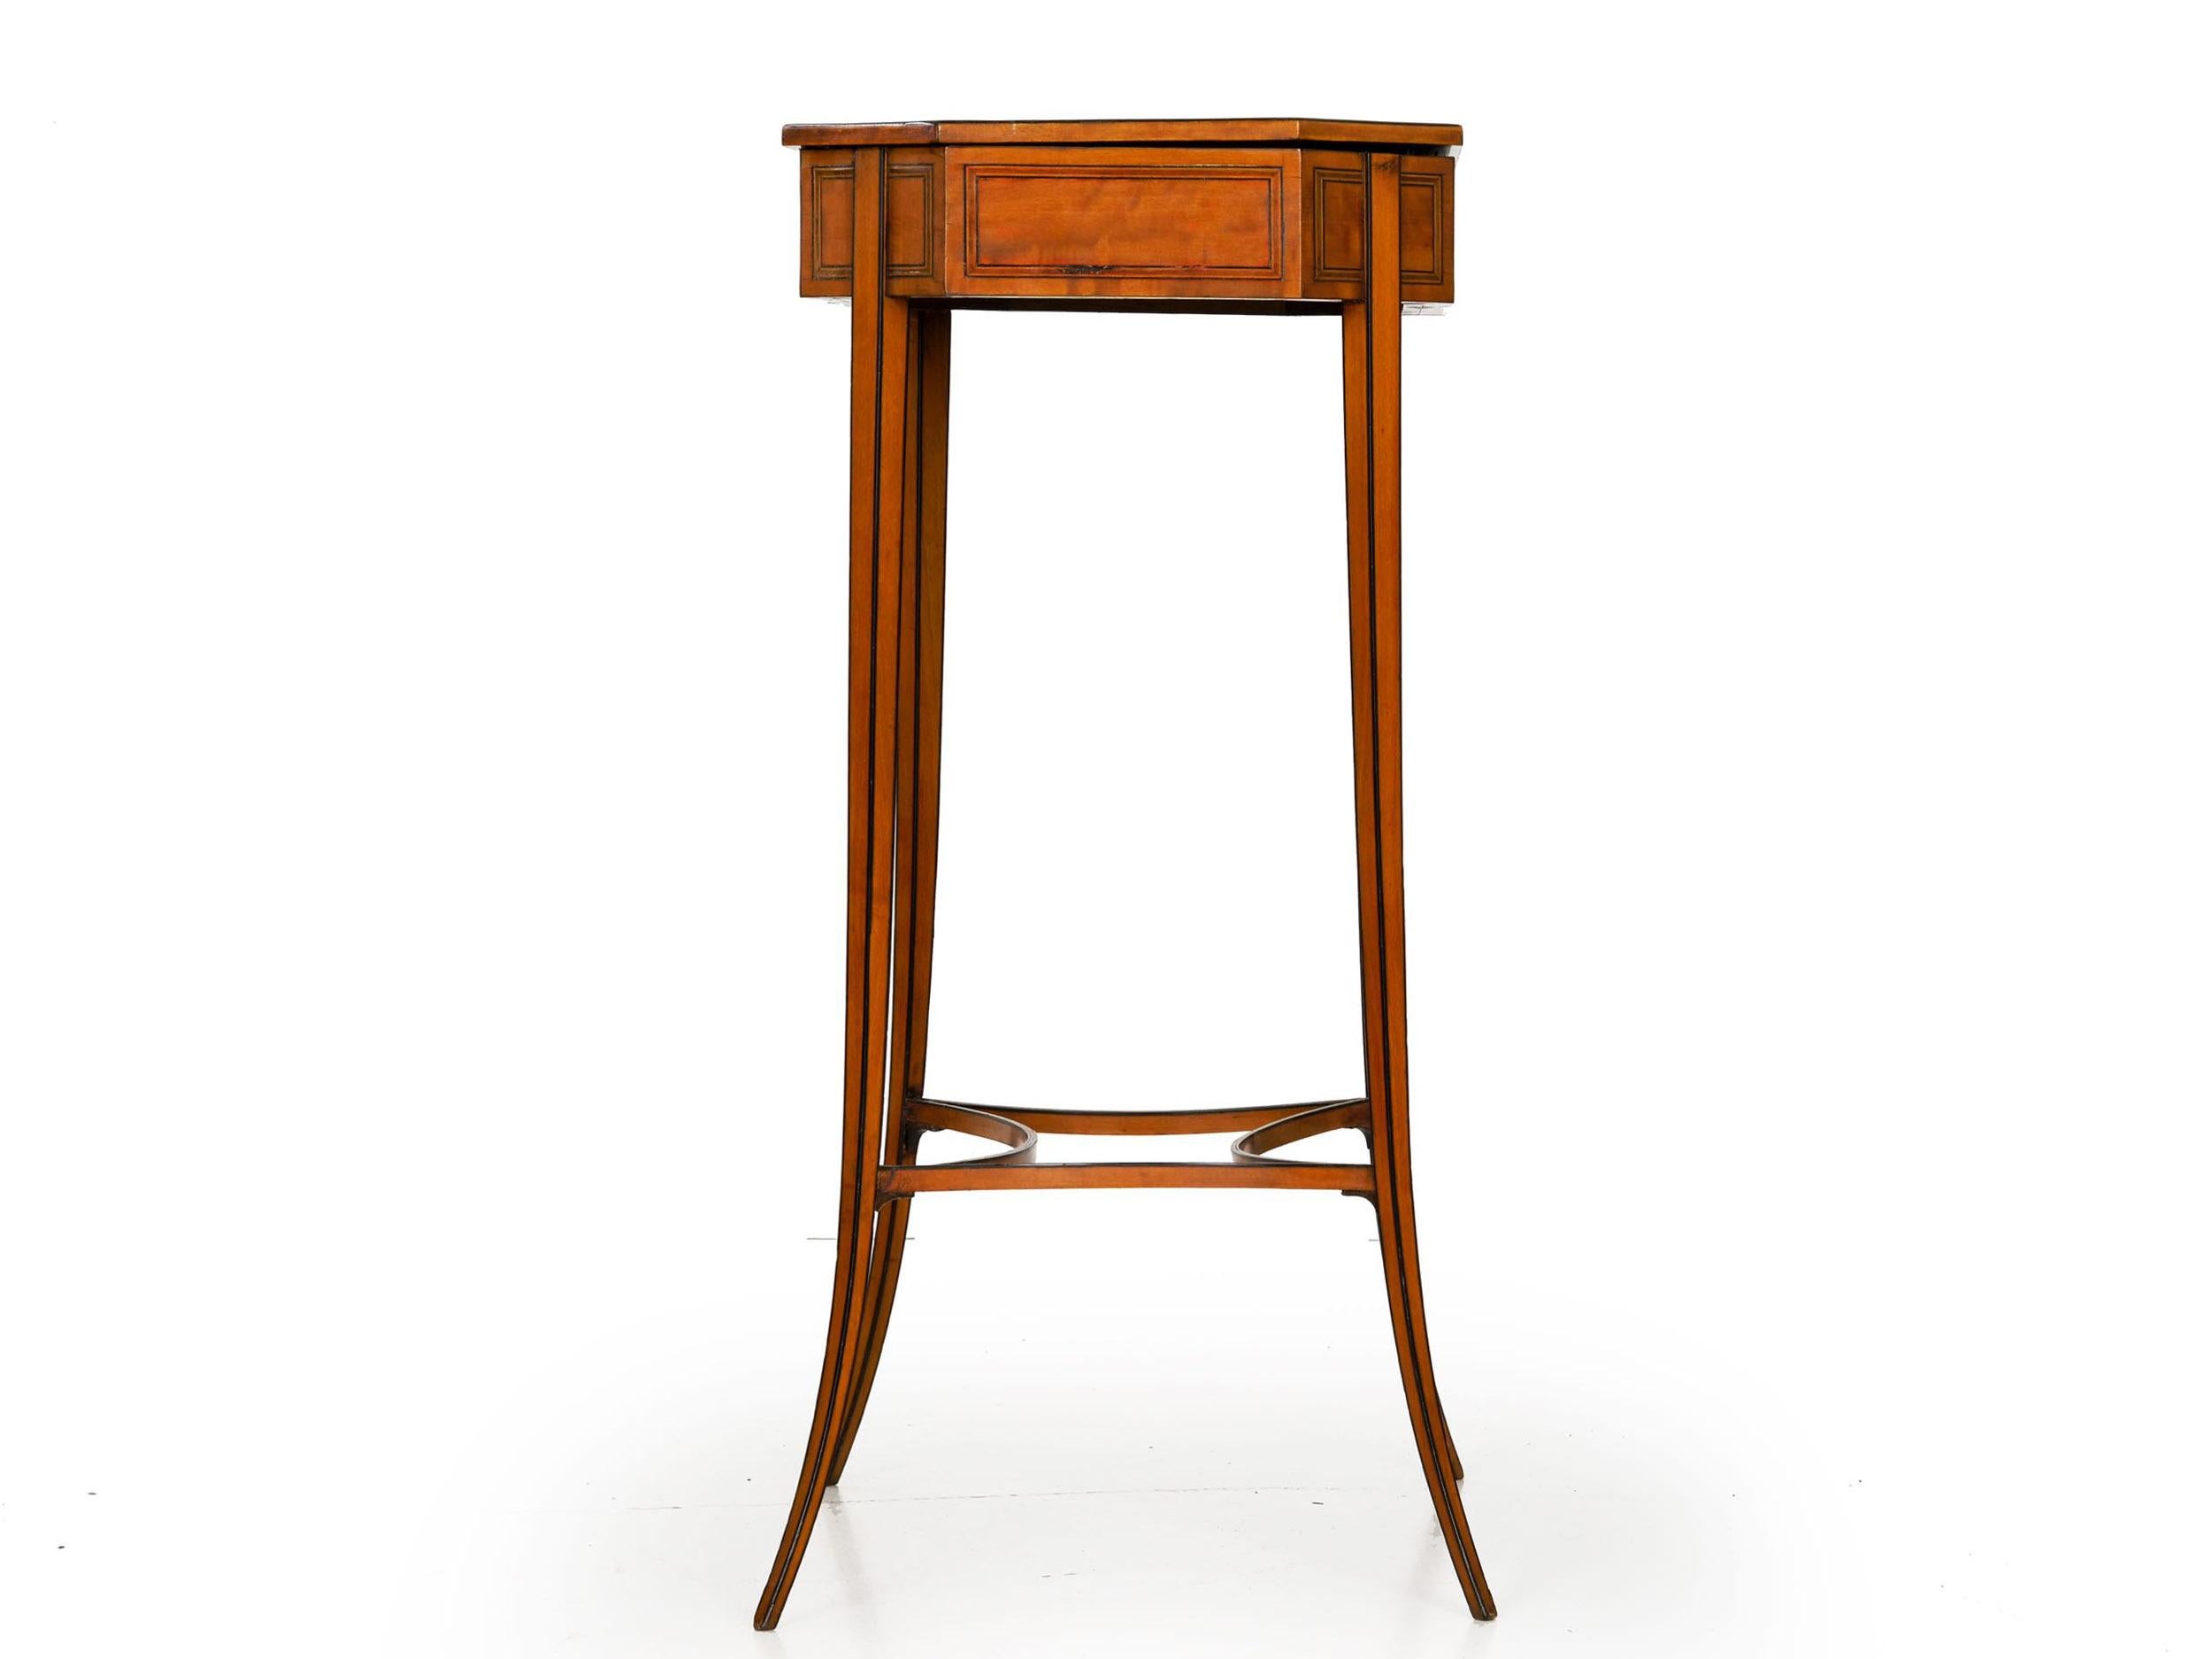 19th Century Regency Satinwood Octagonal Antique Accent Table, England, circa 1800